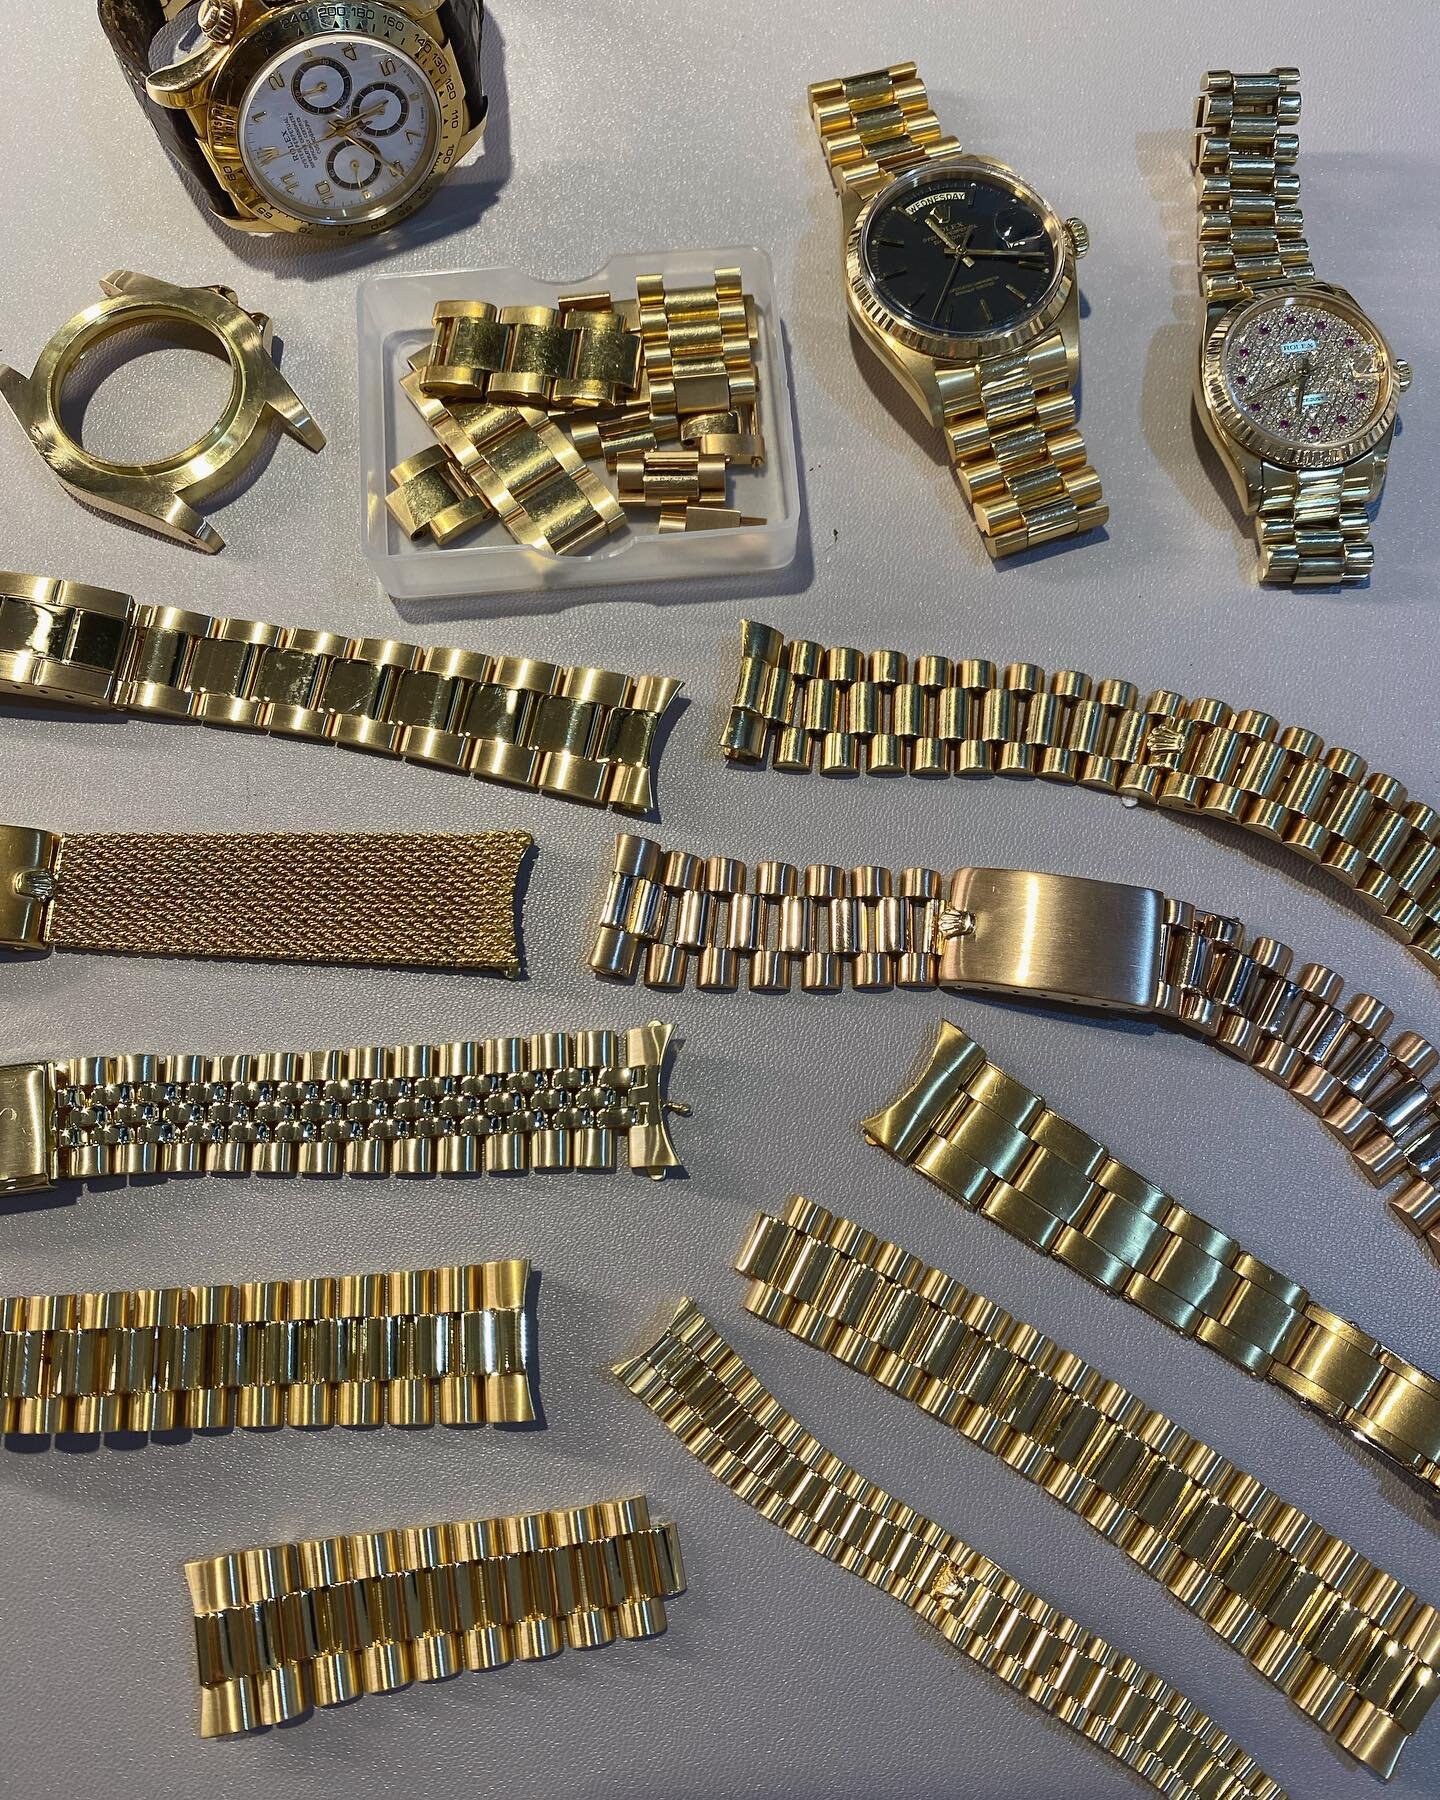 Metal watch bands, be it 18K or Steel, is our speciality. We restore, tighten and refinish hundreds of them every month.

Not many care to fix or restore watch hardware. Brands only care about selling new bands at a hefty price, only if you are lucky